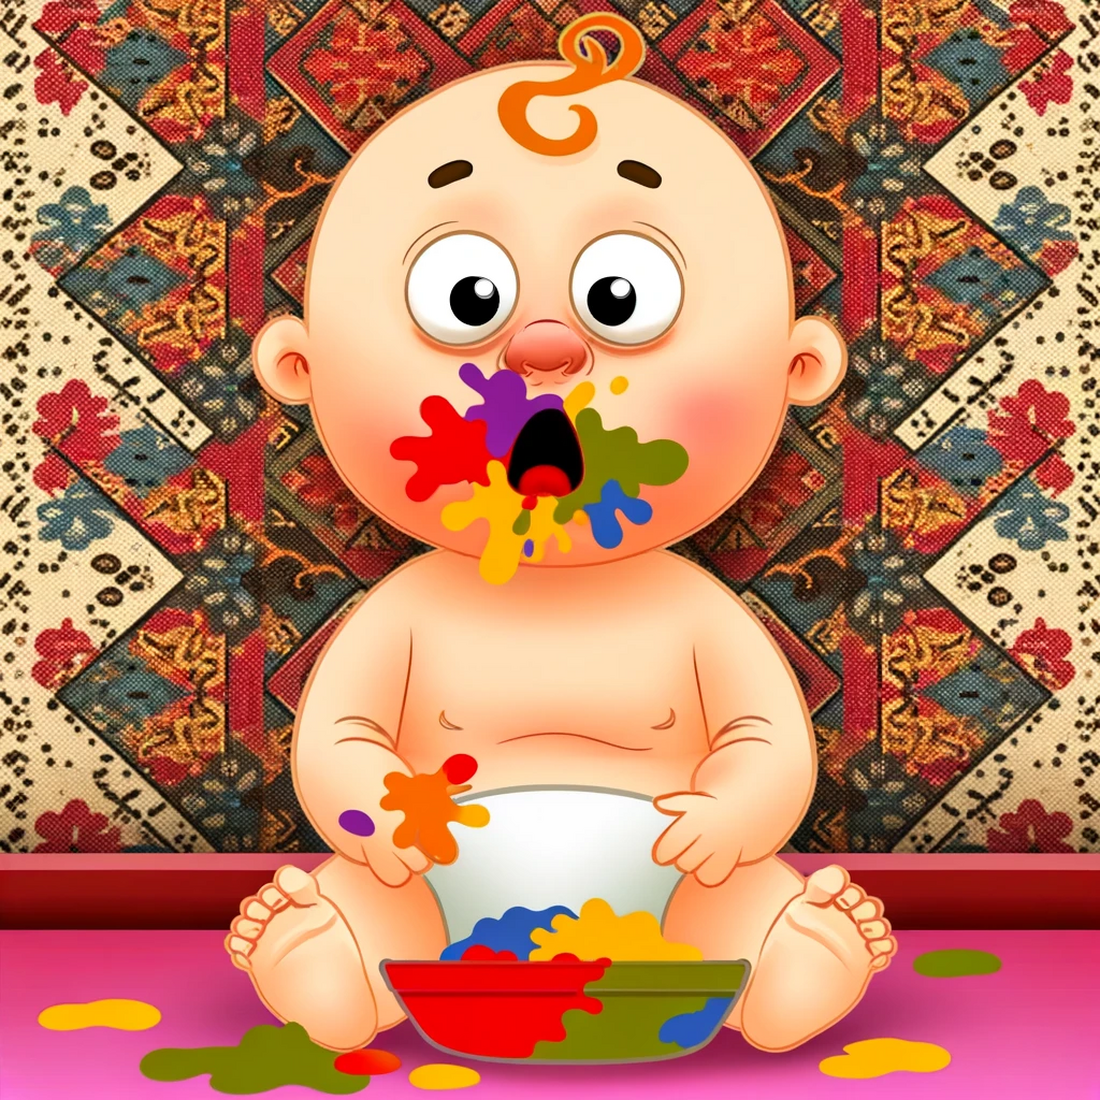 AI art of a baby with food all over its face, in a cartoon style